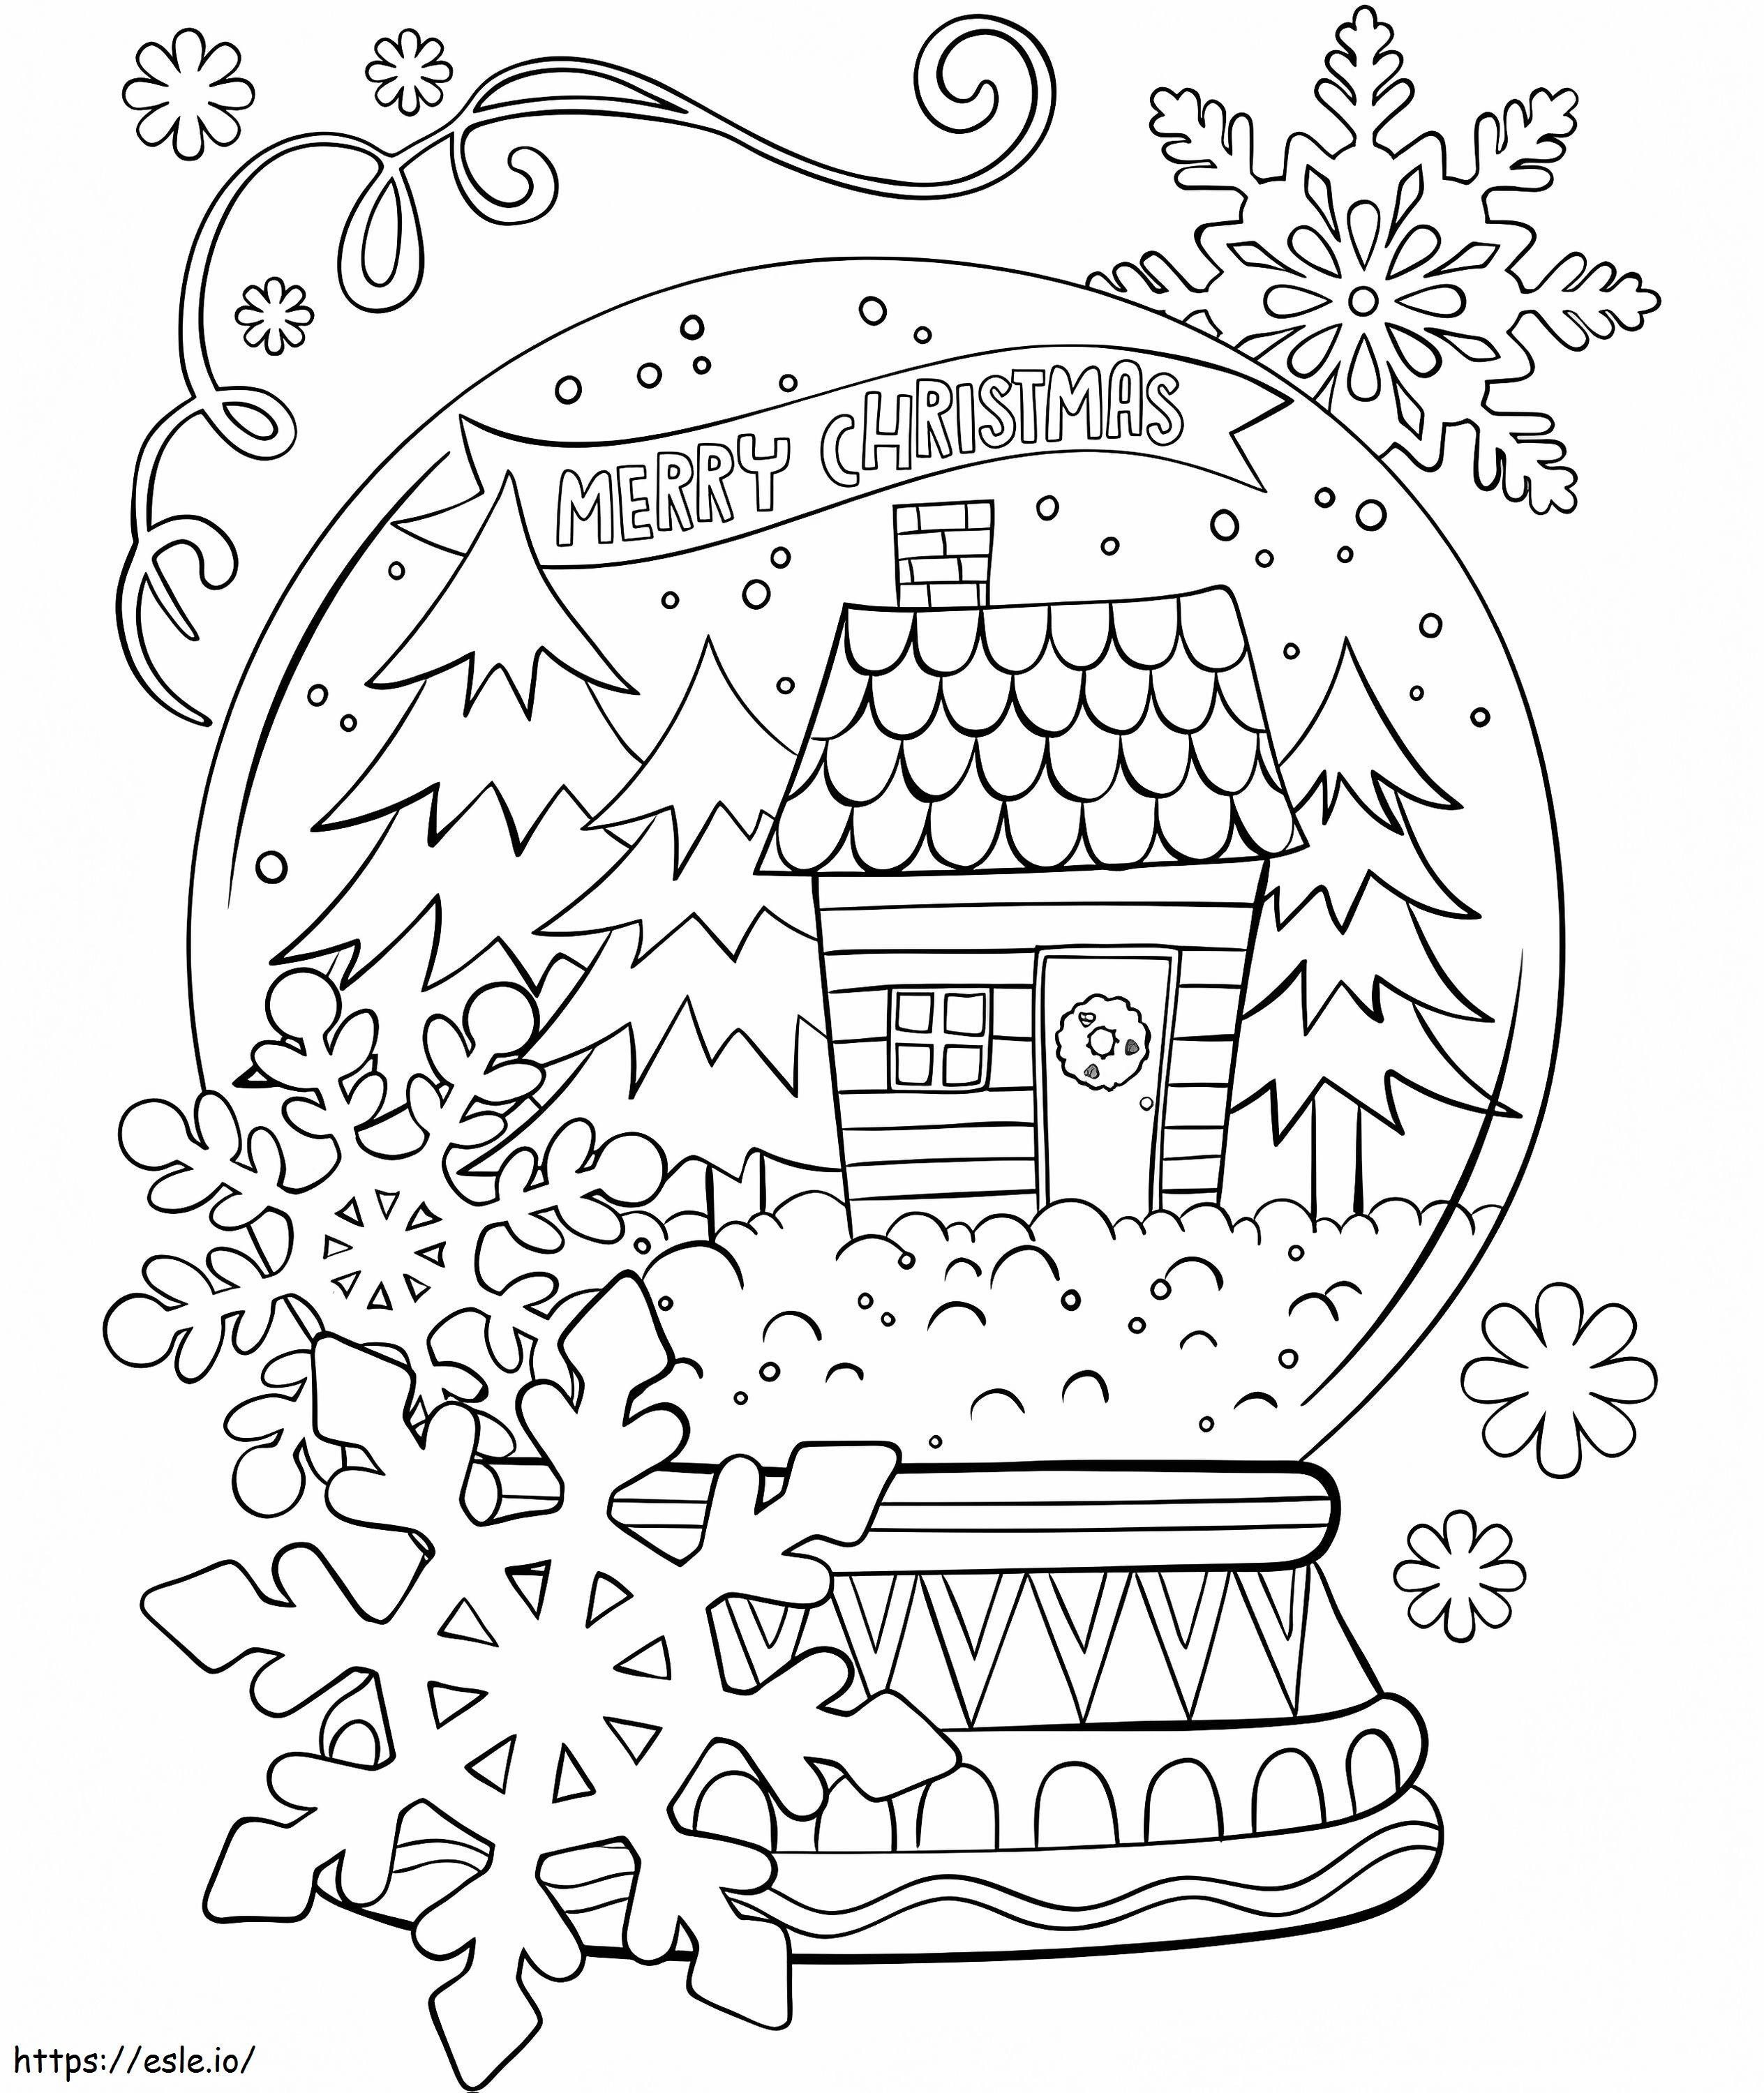 Merry Christmas Snow Globe coloring page